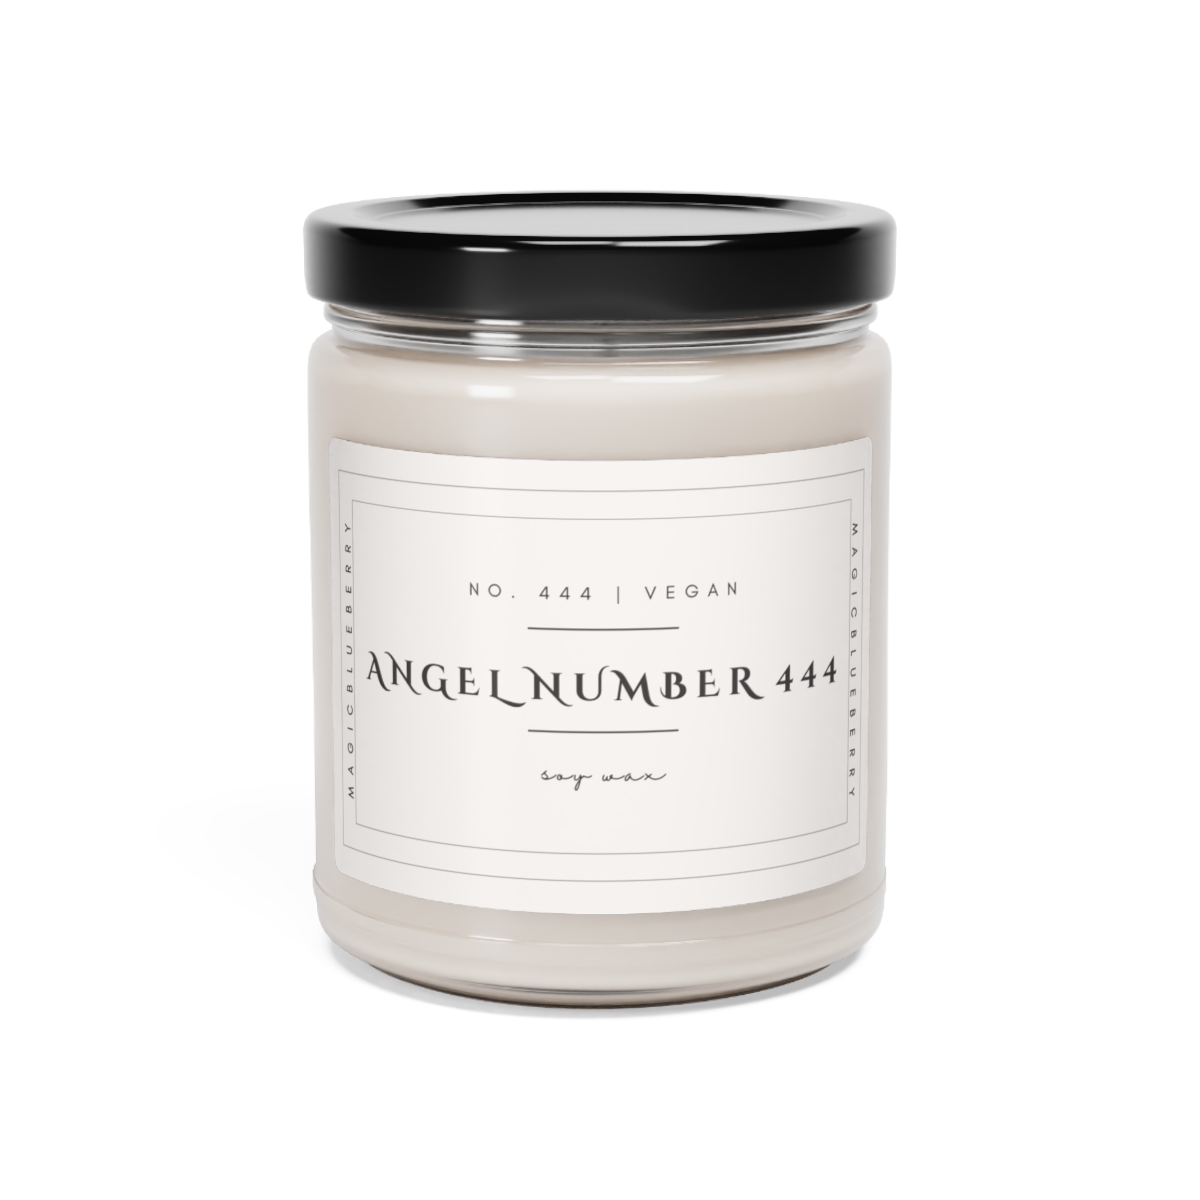 Angel number444 Scented Vegan Soy Wax Candle Clear Jar Candle, Spell Candle, Sassy Candle Vegan Candle Cotton Wick Candle Home Decor Candle product thumbnail image